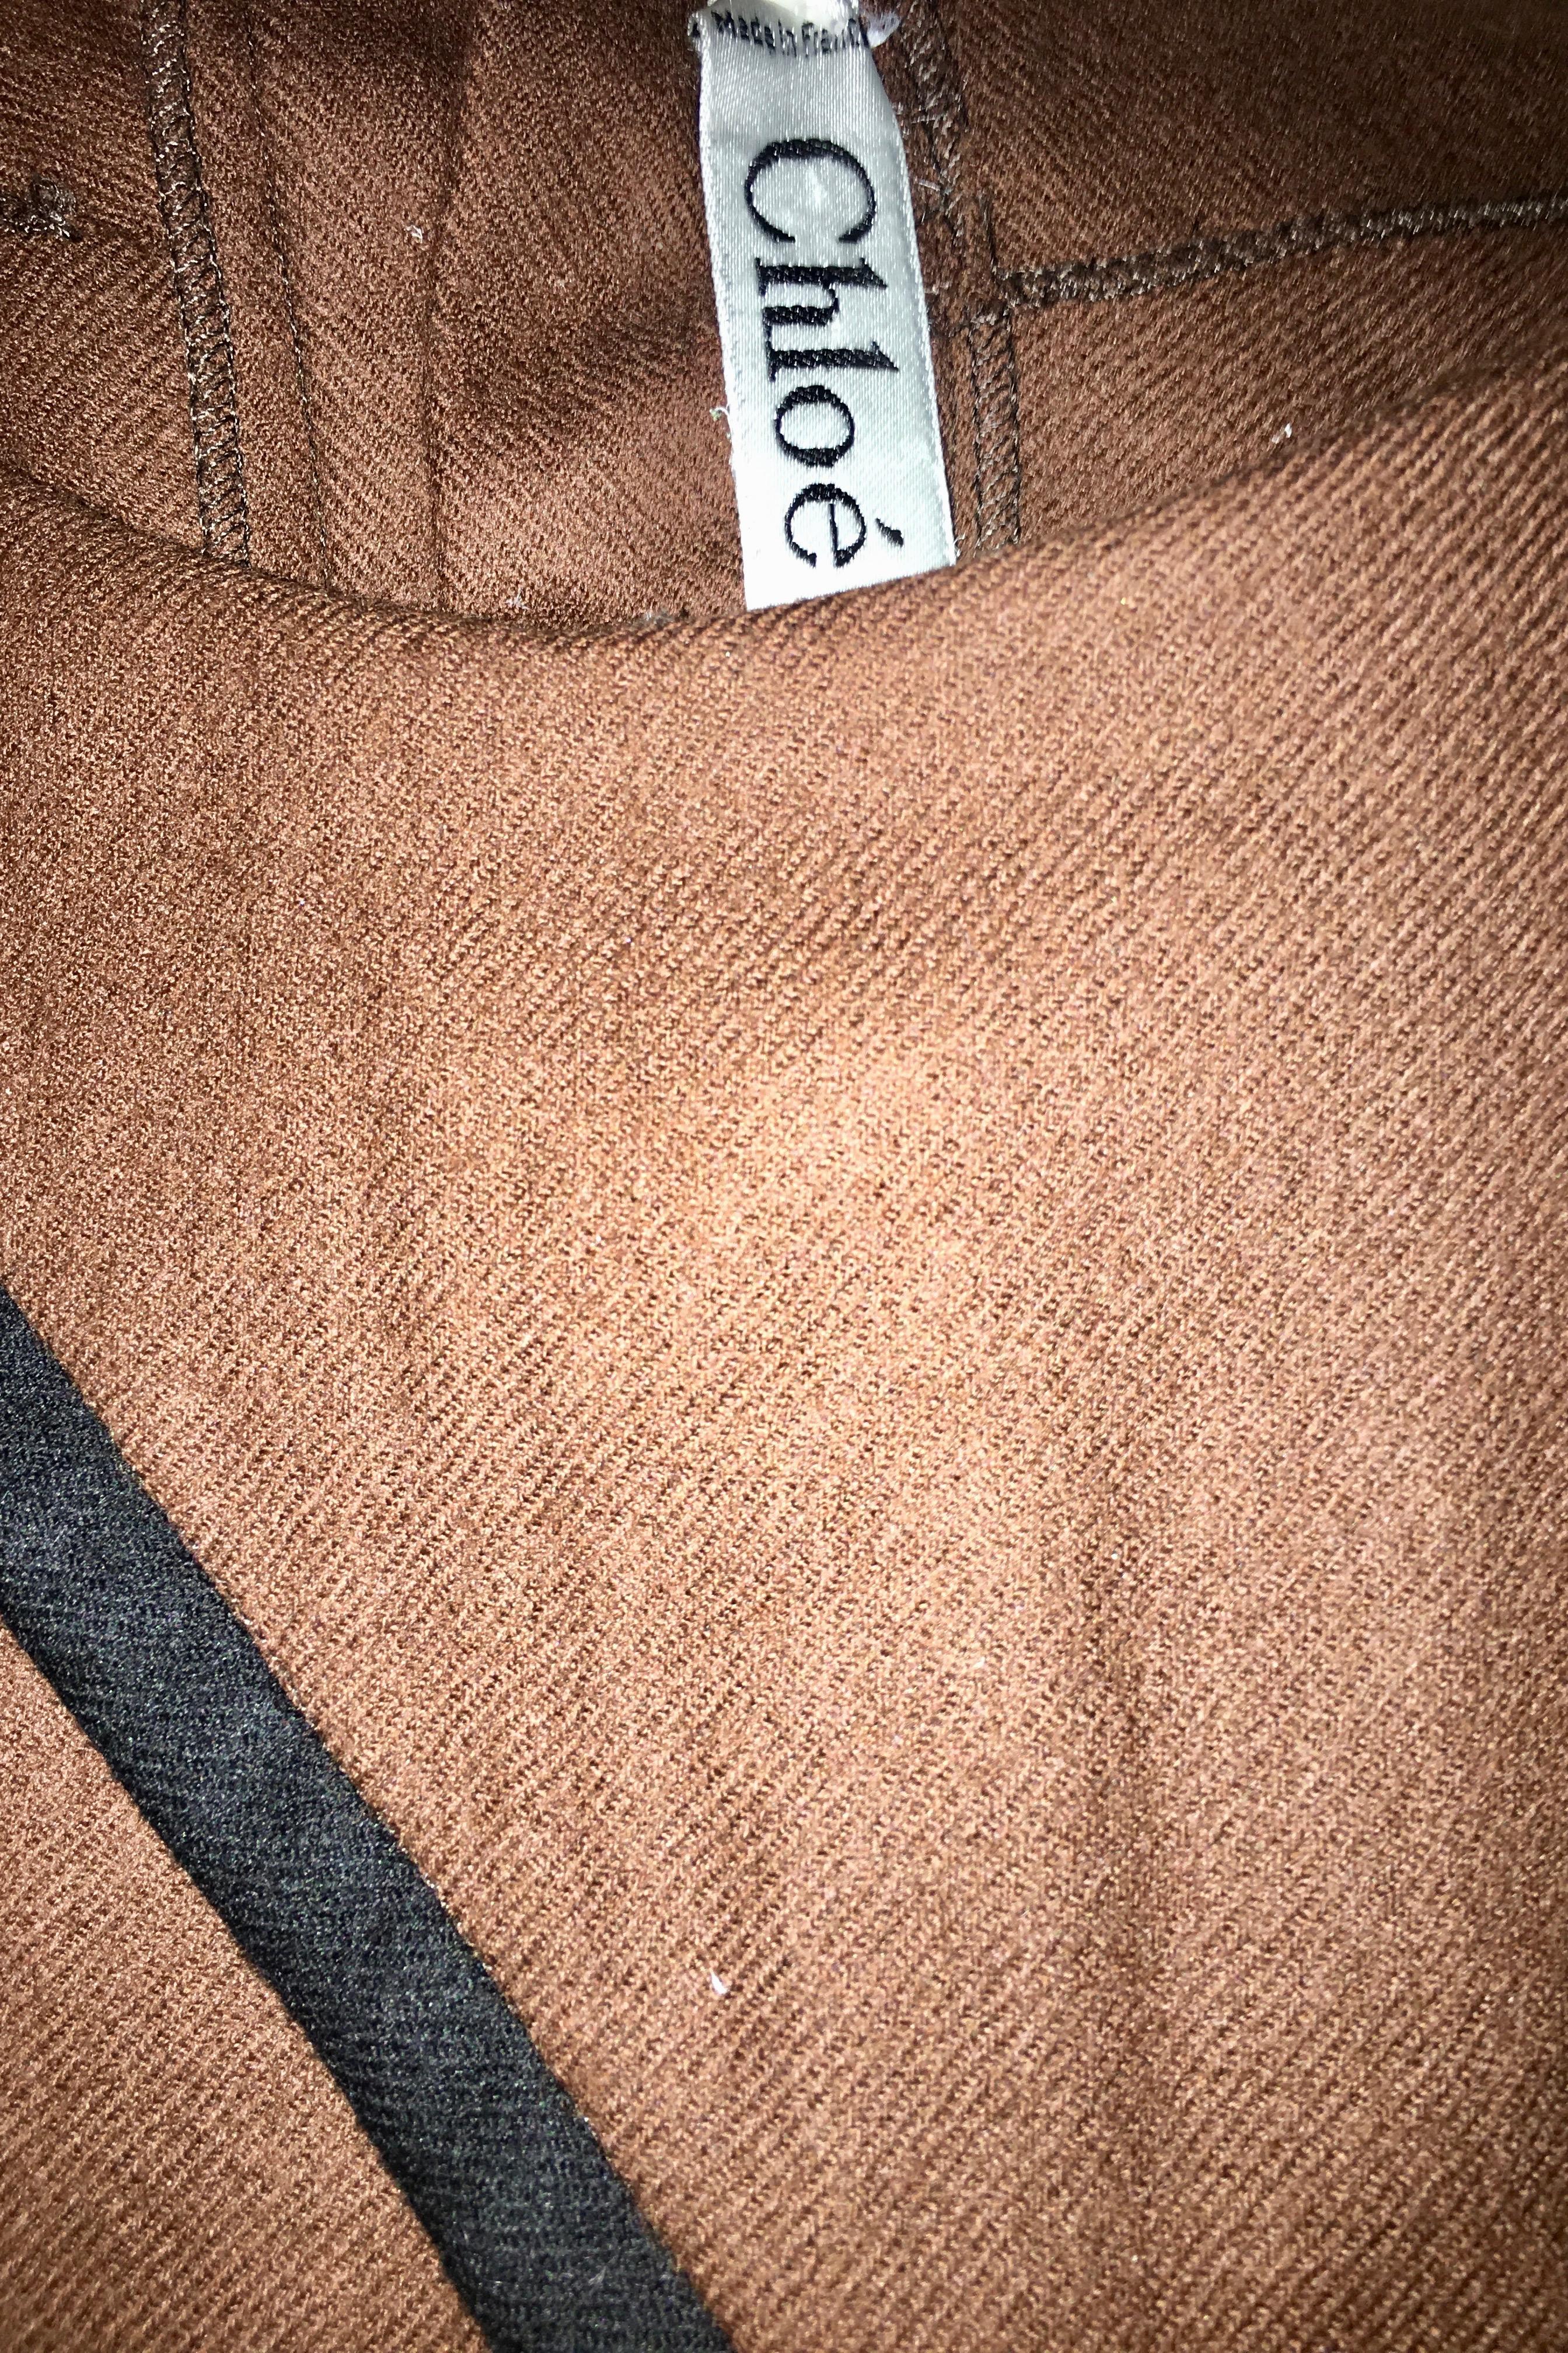 A 1970s Chloé by Karl Lagerfeld brown wool dress with long sleeves, a round neckline and pointed collar. The long sleeved dress closes in the back with button down back. The dress is unlined. 

The size of the dress corresponds to a modern size